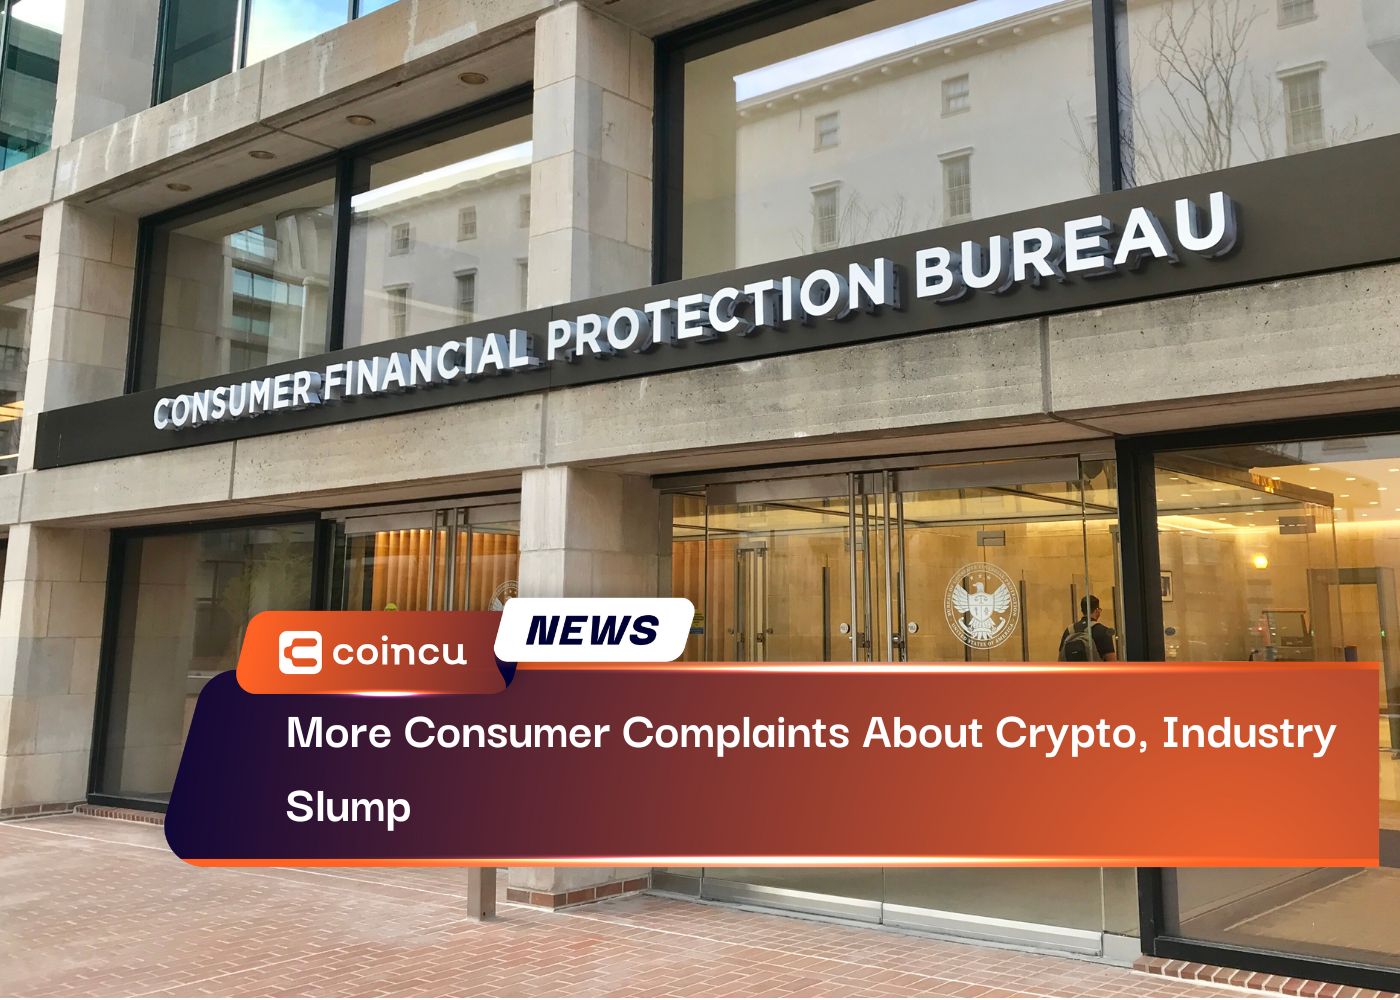 More Consumer Complaints About Crypto, Industry Slump